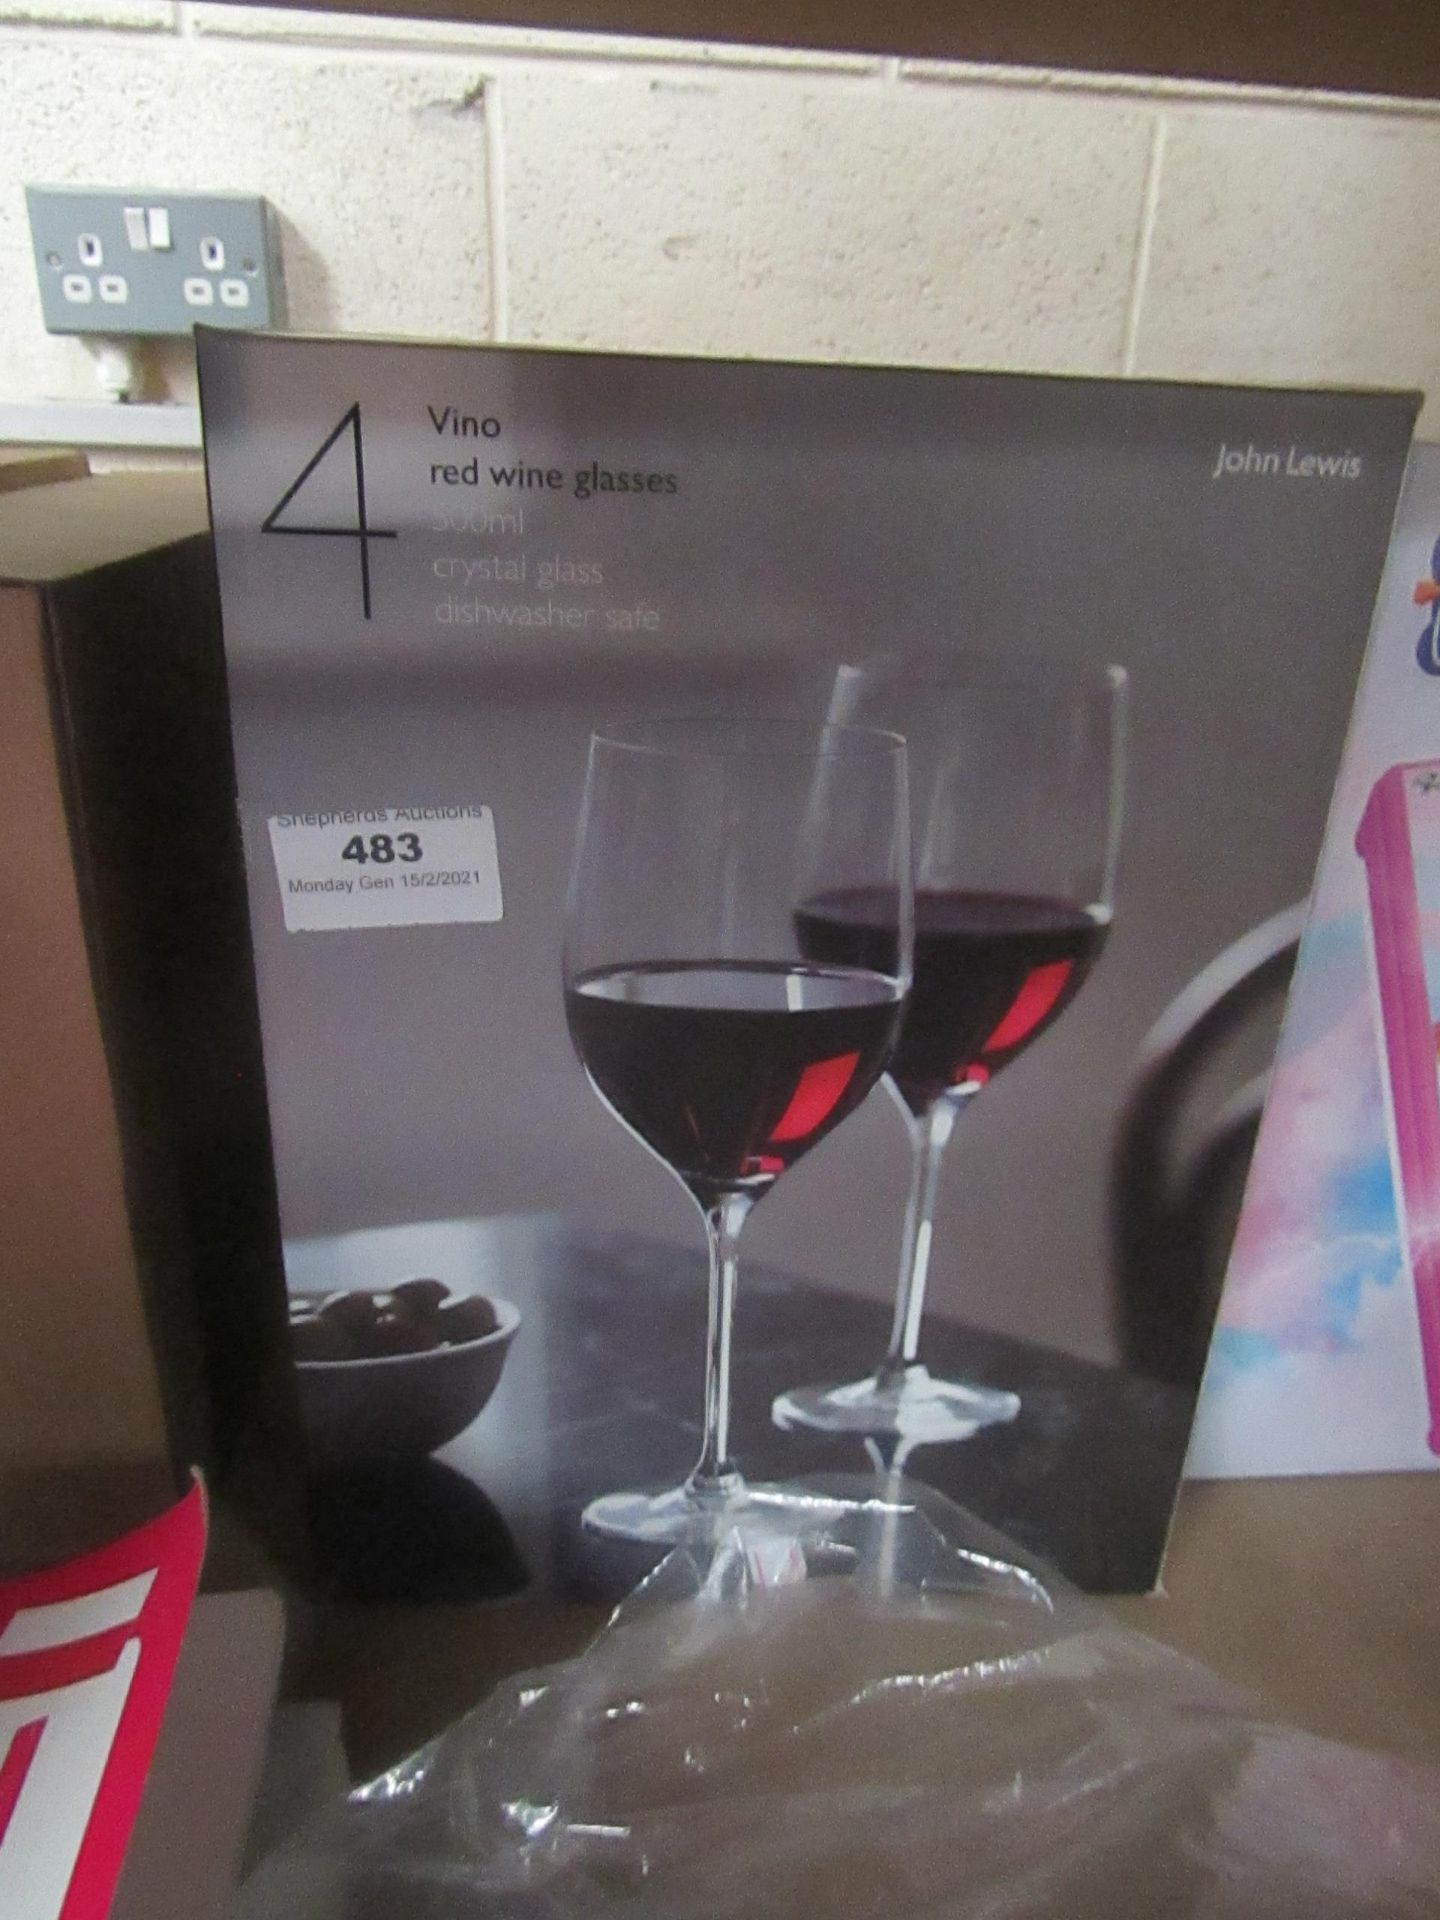 4x Jhon lewis vino red wine glasses 500ml crystal glass, Unchecked & Boxed